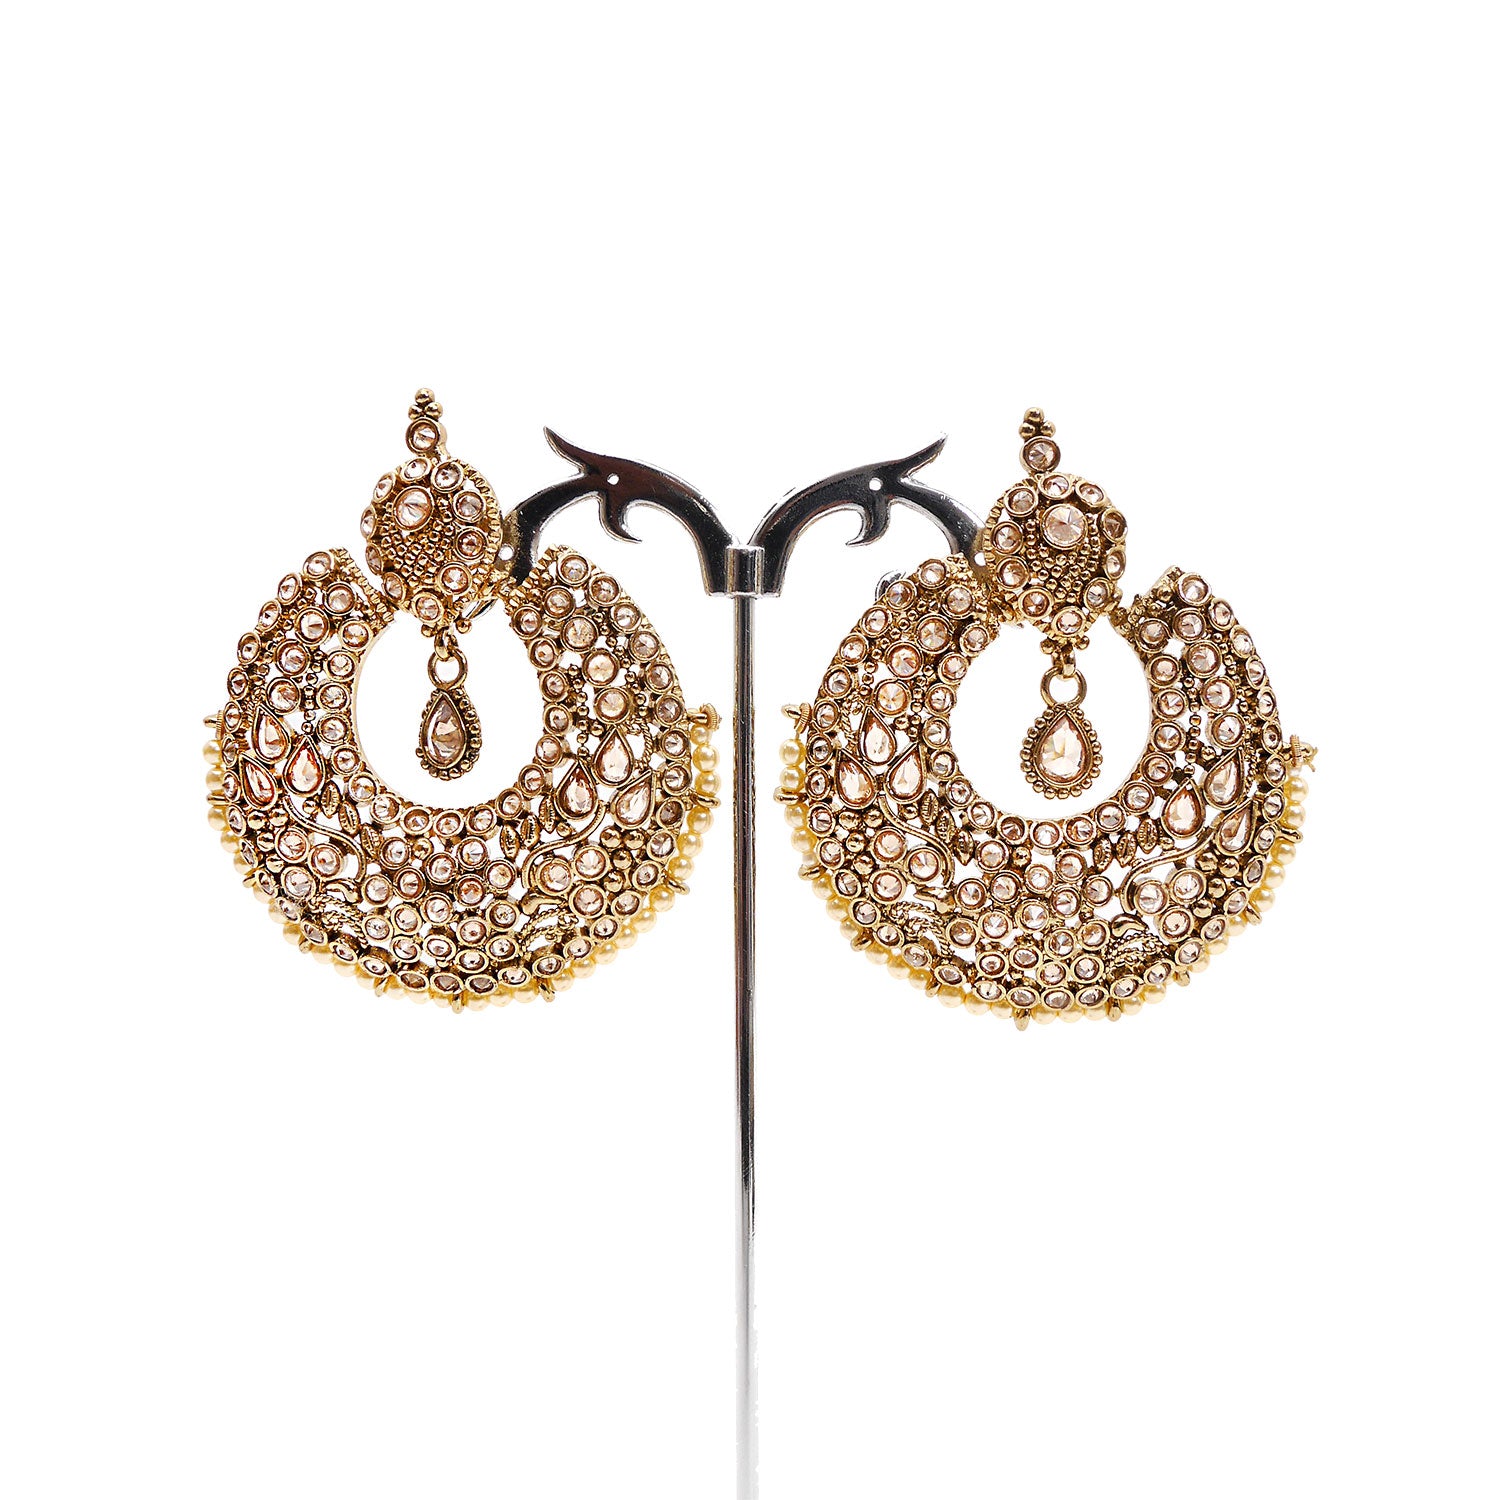 Rutvi Chandbali Earrings in Pearl and Antique Gold